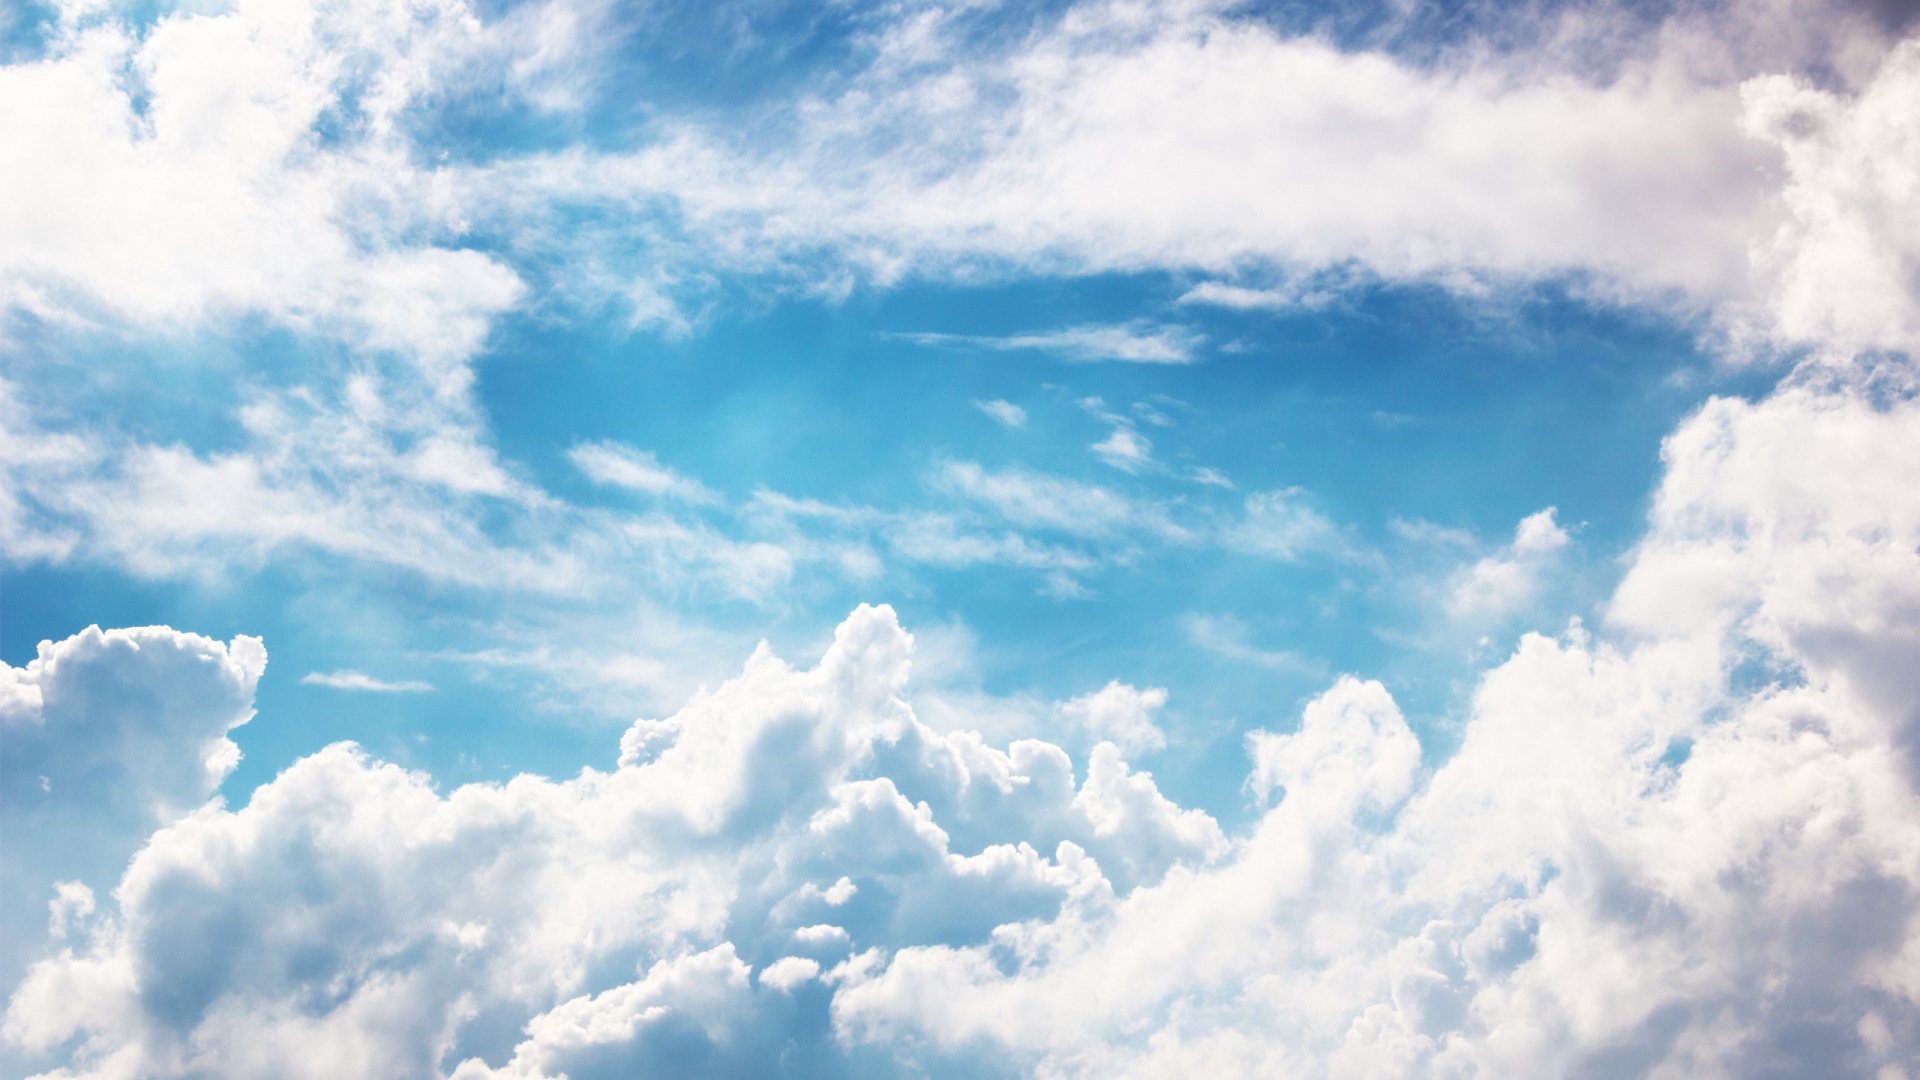 ... White Clouds Background · White Clouds Picture · White Clouds Wallpaper